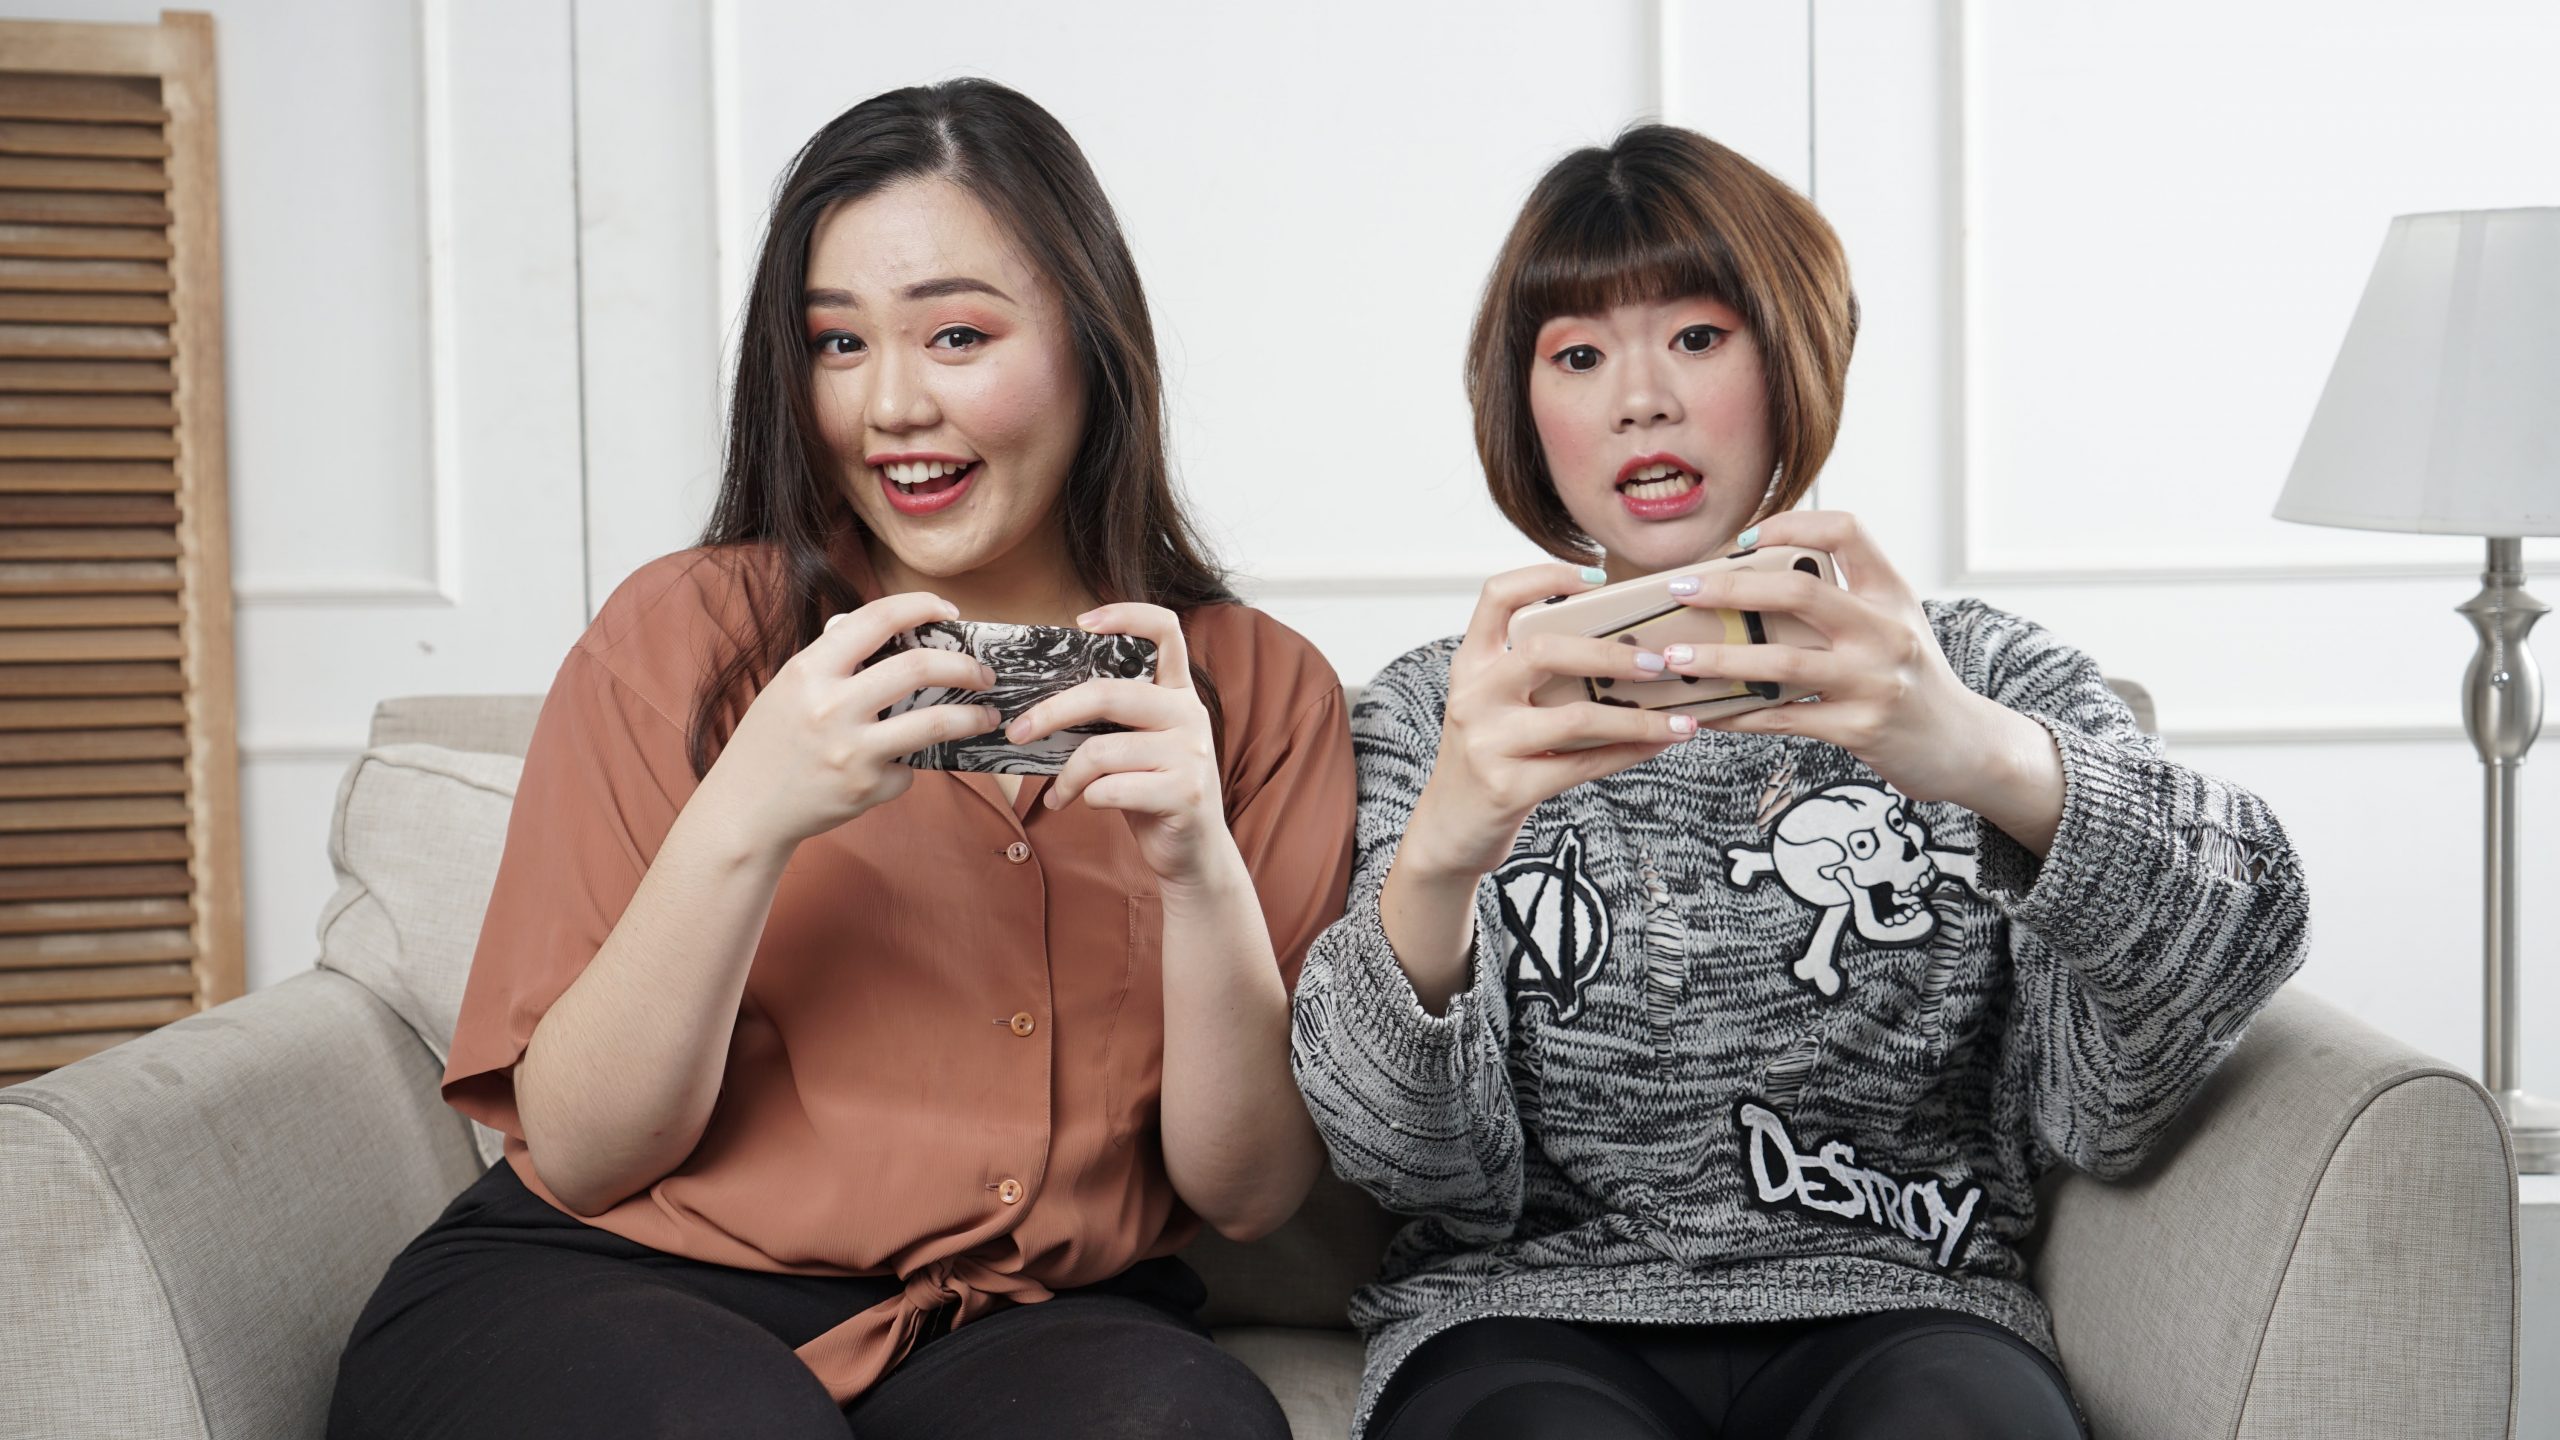 Mobile Games news, trends and expert opinions